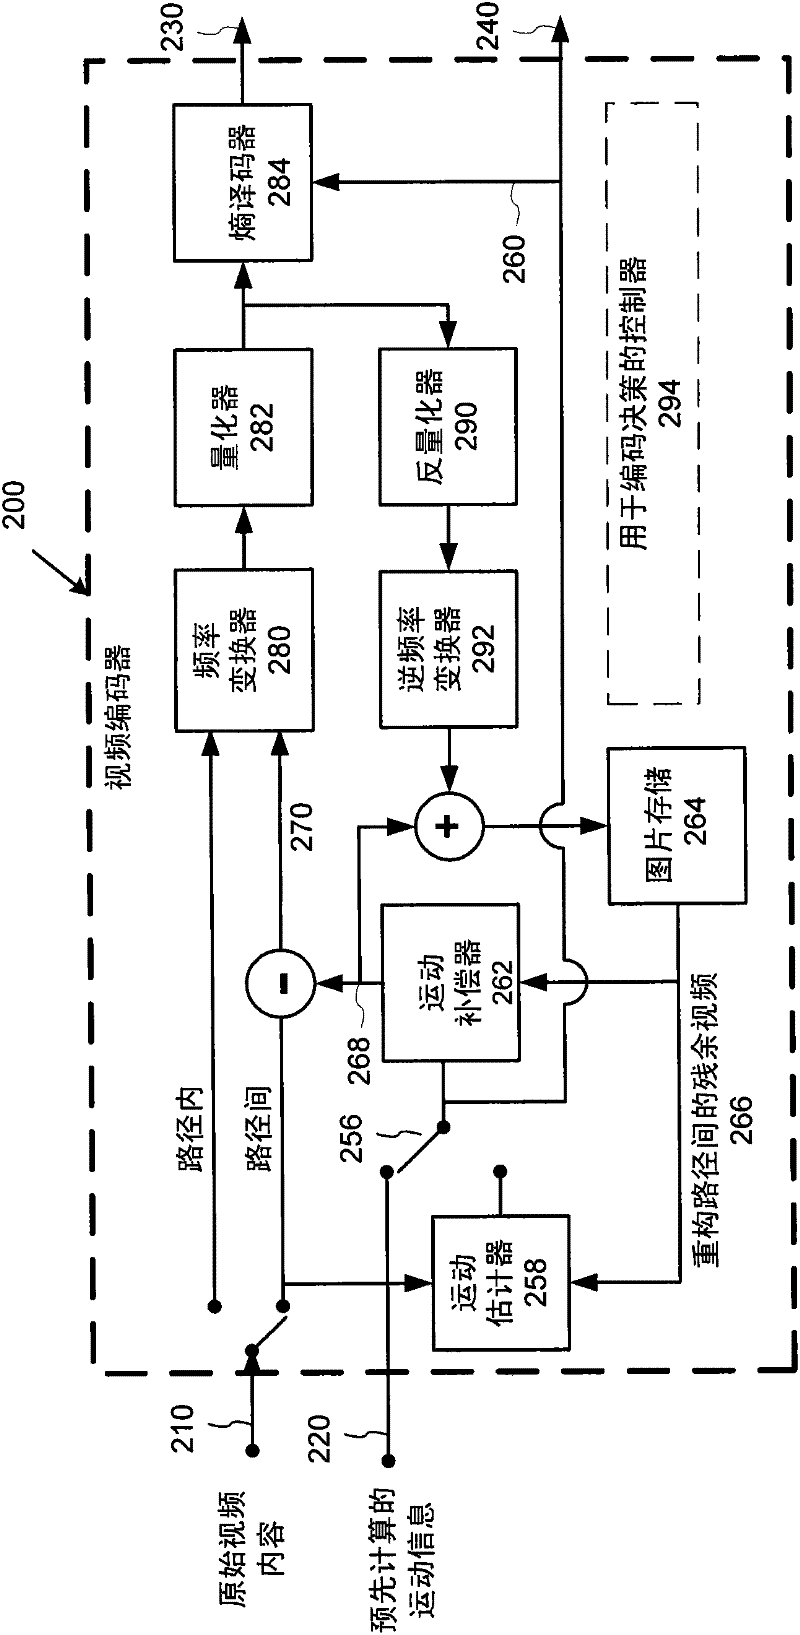 Multi-bitrate video encoding using variable bitrate and dynamic resolution for adaptive video streaming